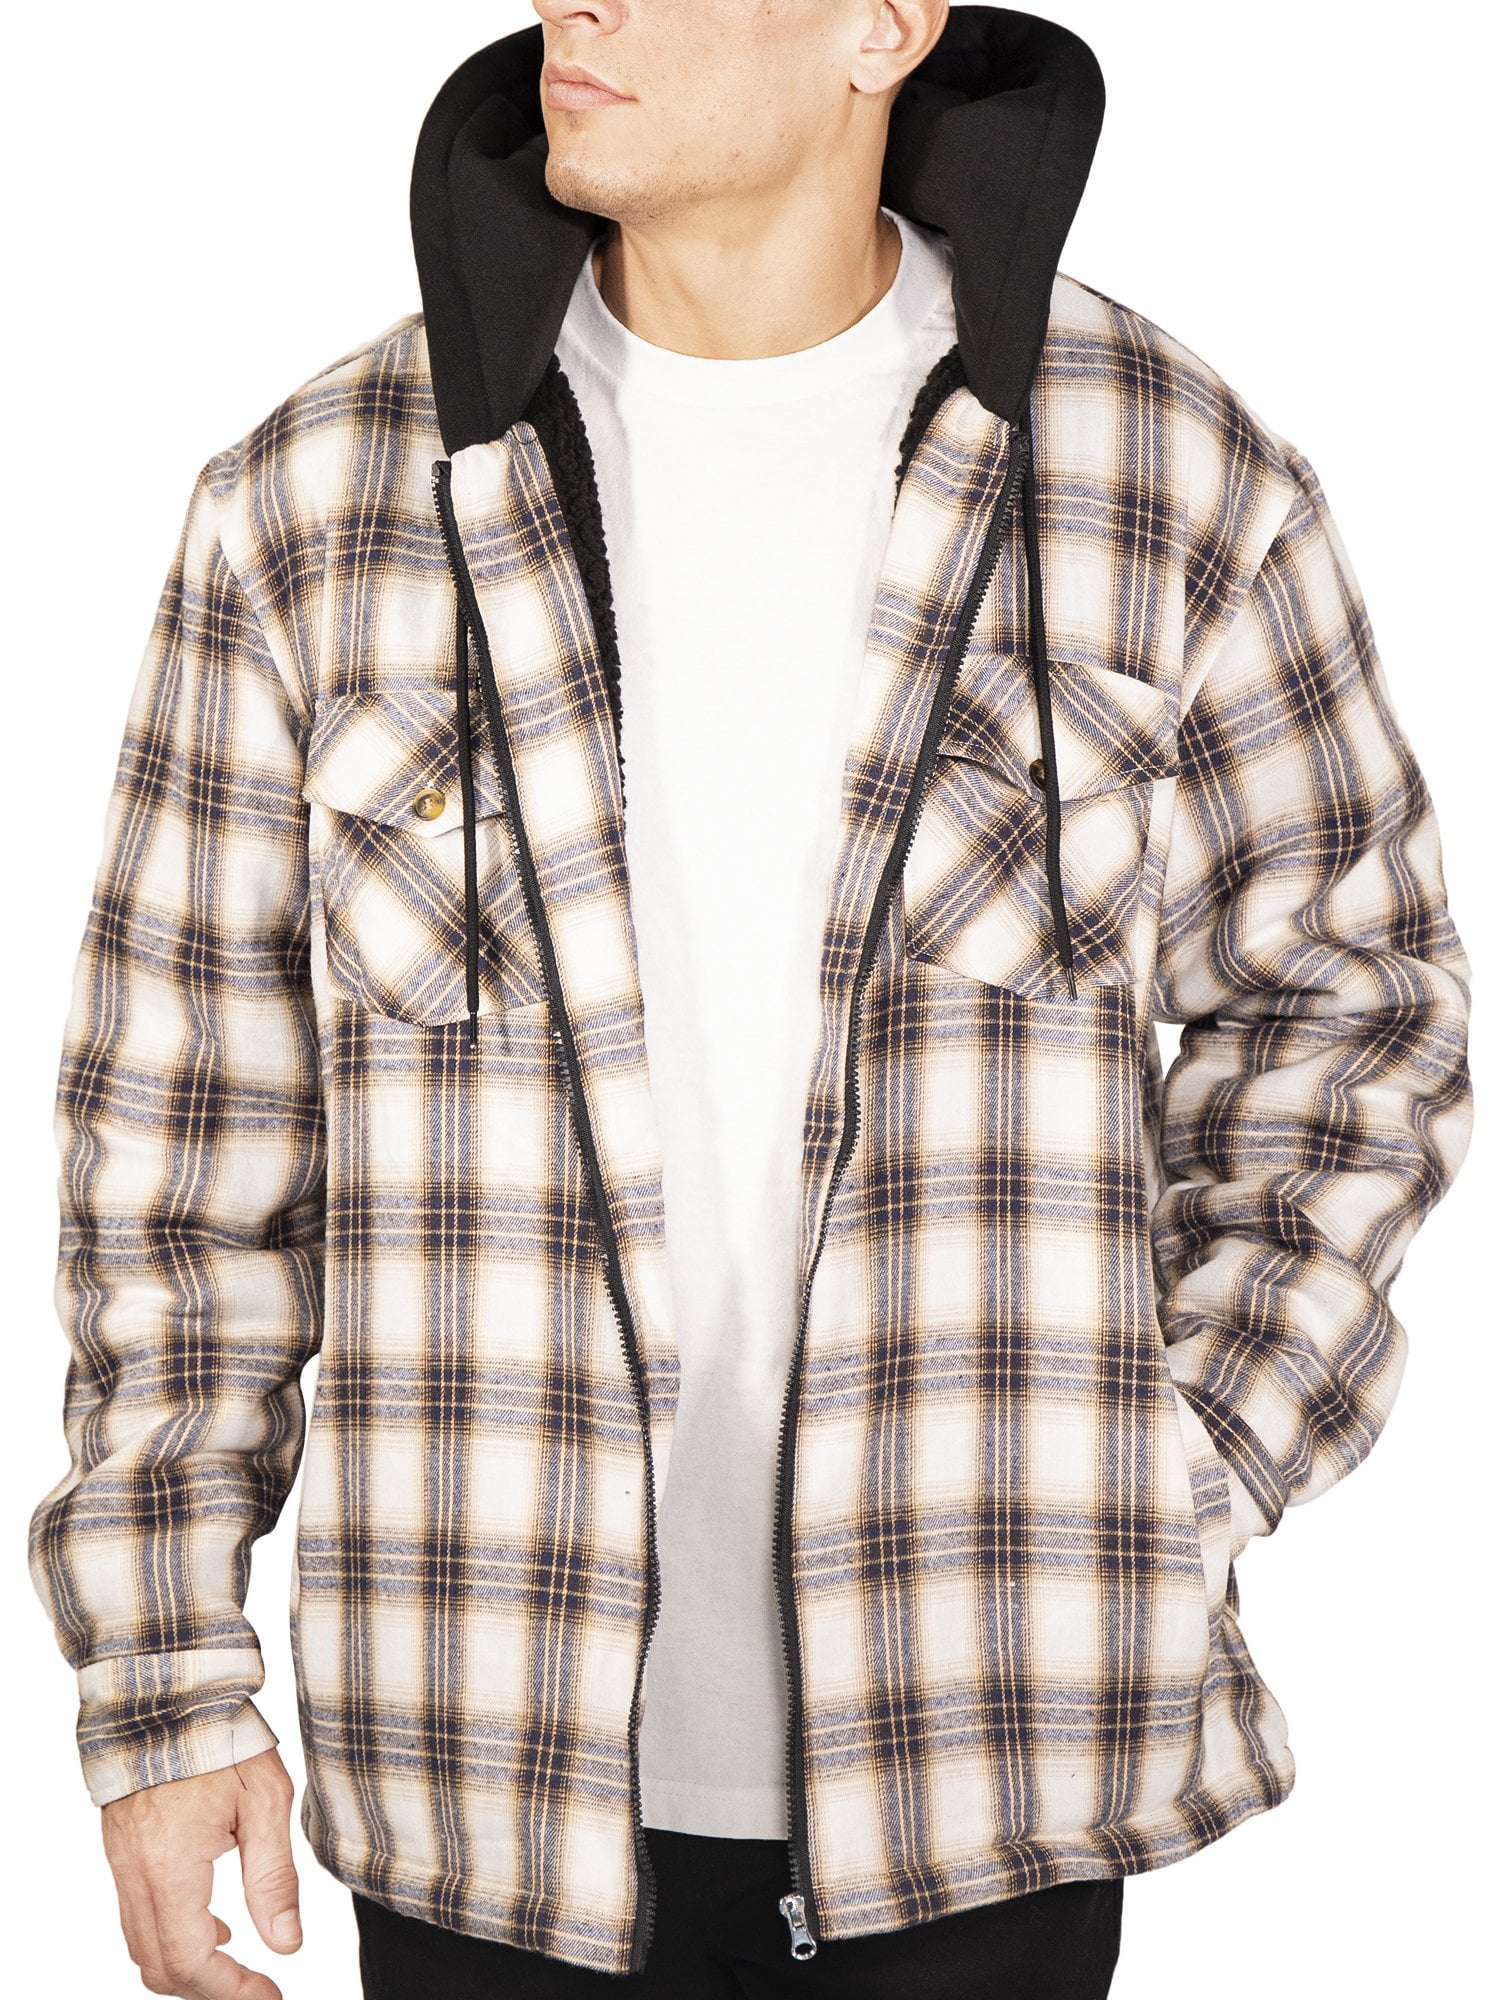 Flannel Jacket Plaid Jacket Hooded Zip Sherpa Lined Extra Heavyweight US Stock